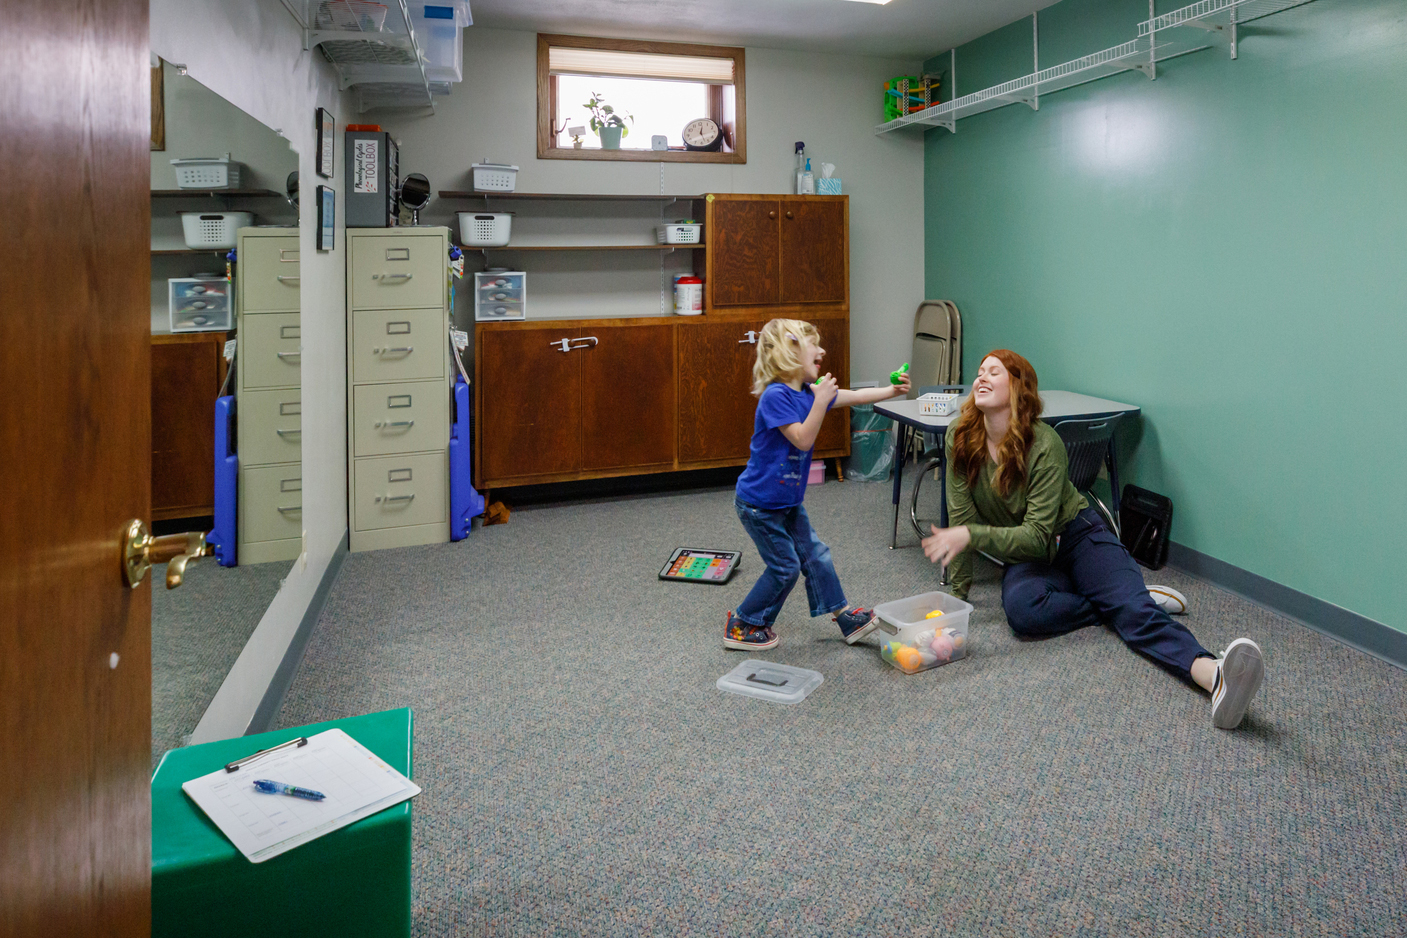 Therapist and young client play together in a therapy room.